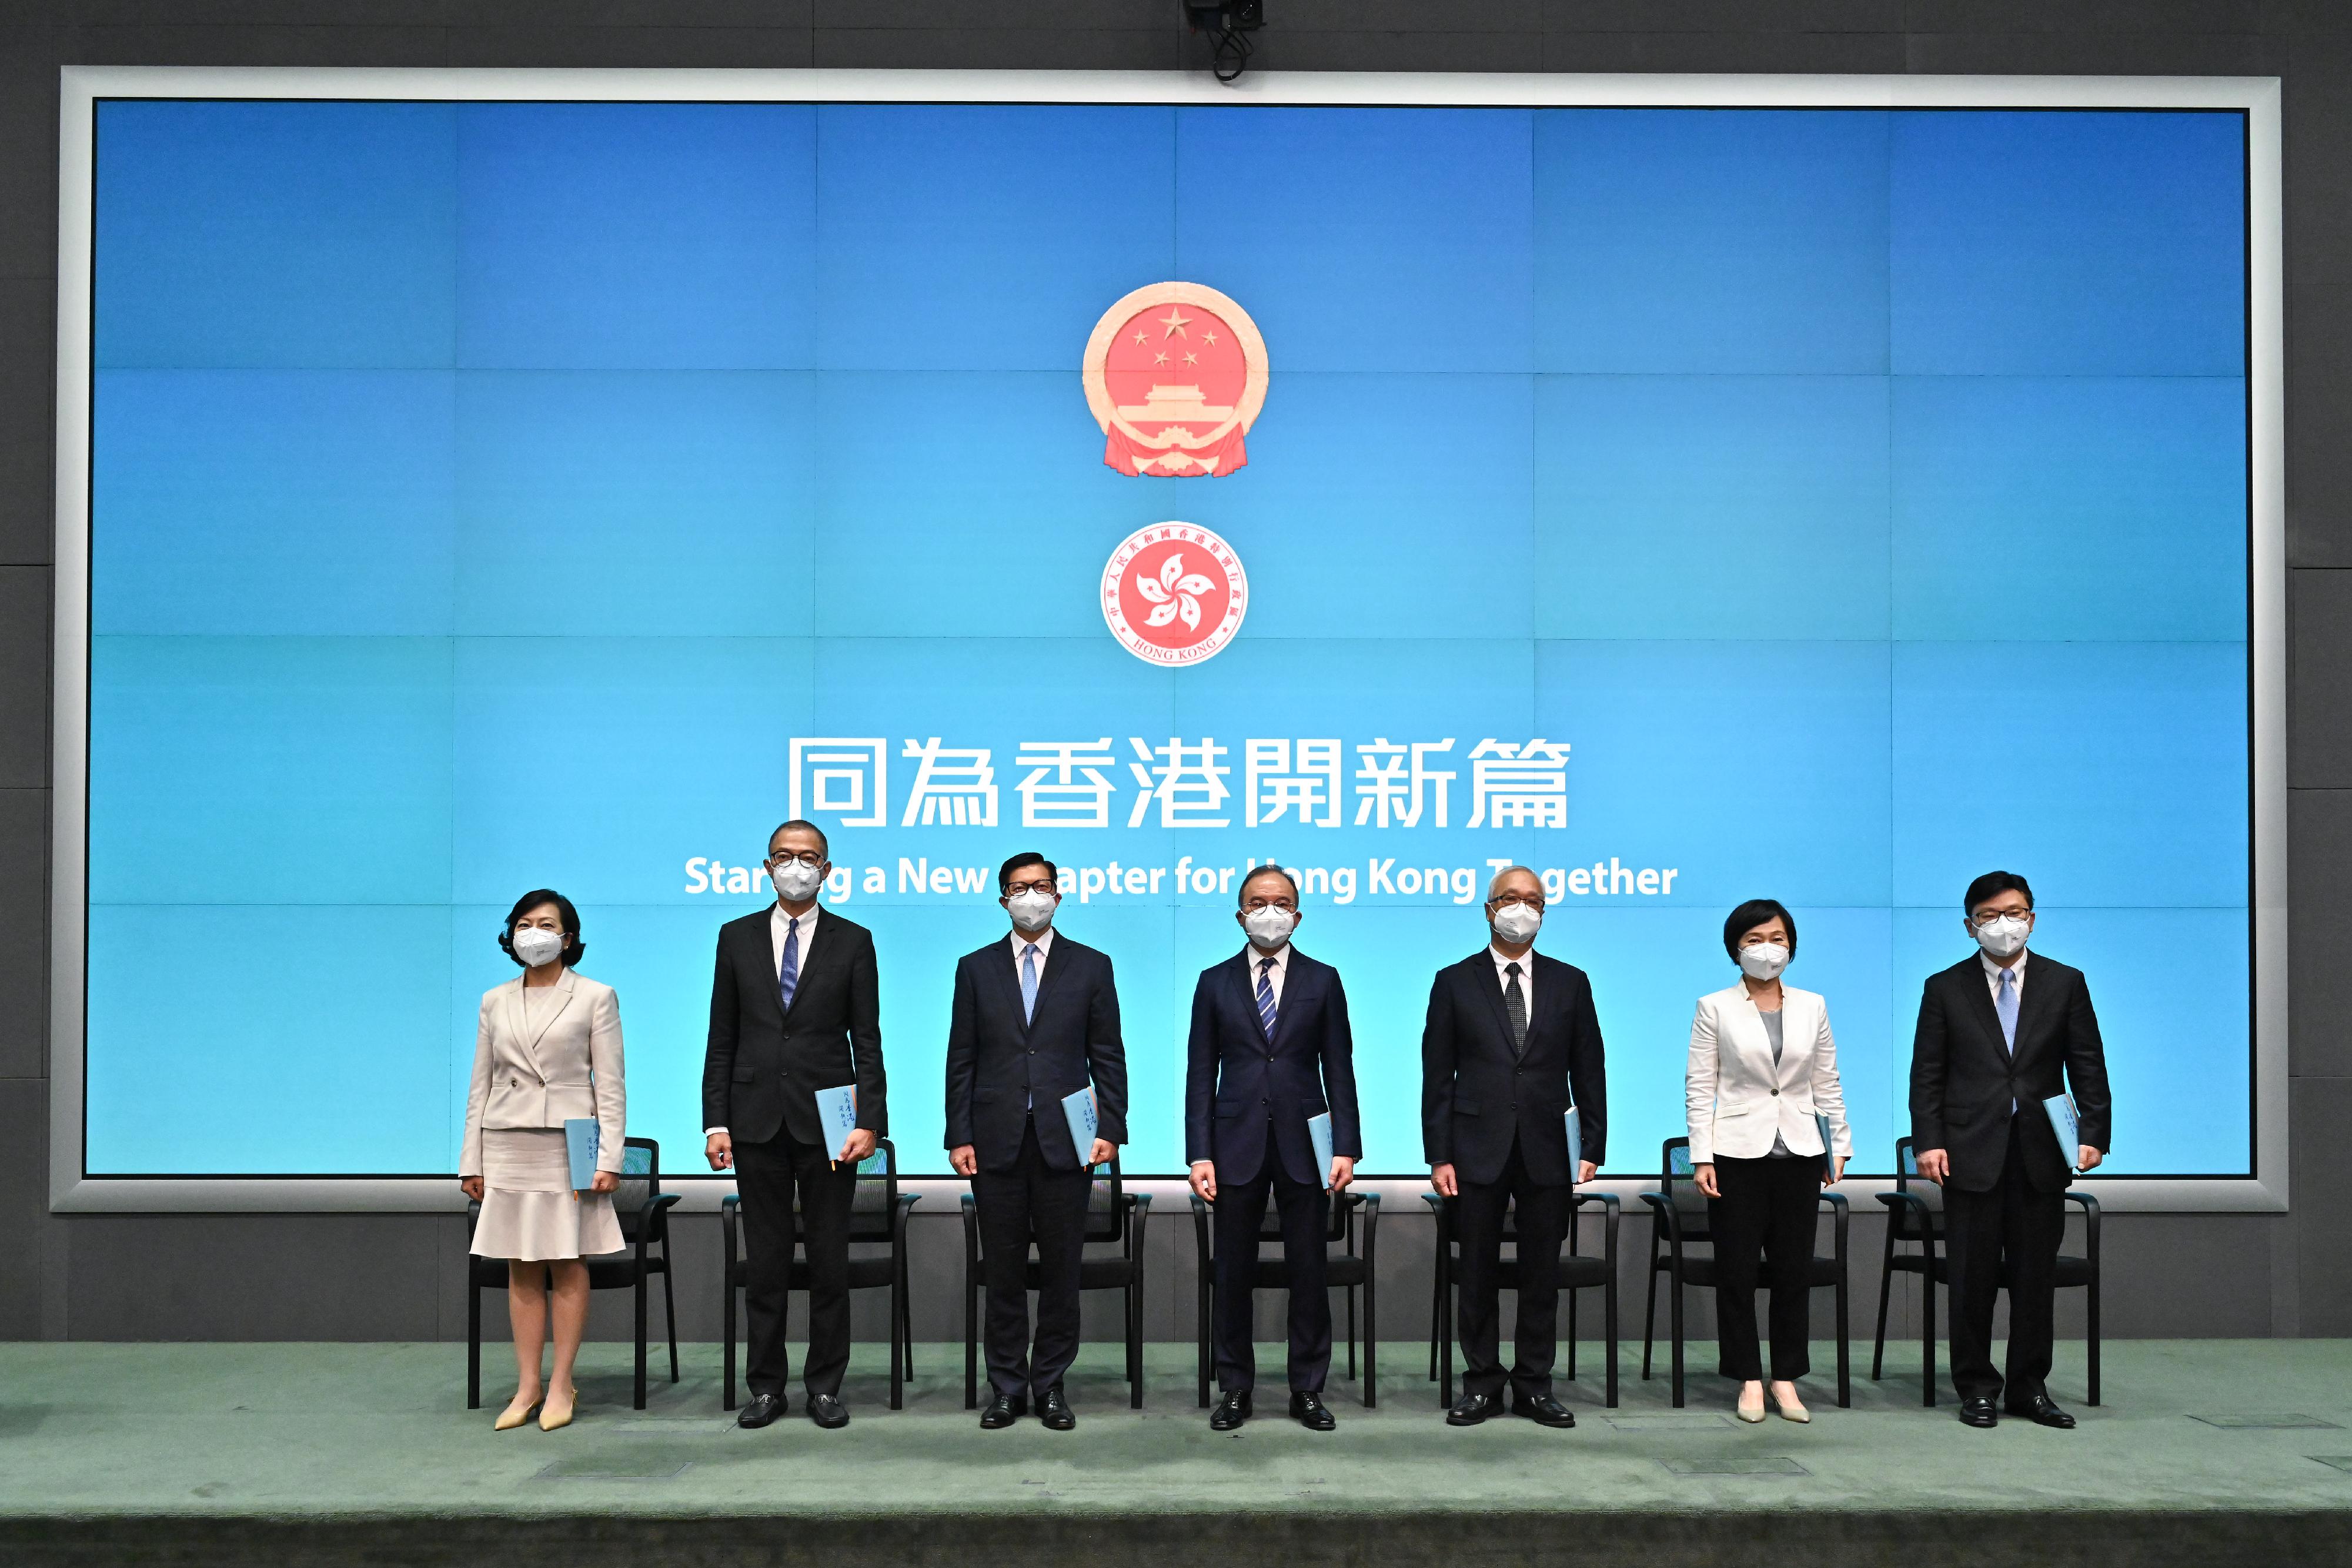 Principal Officials of the sixth-term of the Hong Kong Special Administrative Region Government (from left), the Secretary for Home and Youth Affairs (designate), Ms Alice Mak; the Secretary for Health (designate), Professor Lo Chung-mau; the Secretary for Security (designate), Mr Tang Ping-keung; the Secretary for Constitutional and Mainland Affairs (designate), Mr Erick Tsang Kwok-wai; the Secretary for Environment and Ecology (designate), Mr Tse Chin-wan; the Secretary for Education (designate), Dr Choi Yuk-lin; and the Secretary for Labour and Welfare (designate), Mr Chris Sun, meet the media today (June 19).